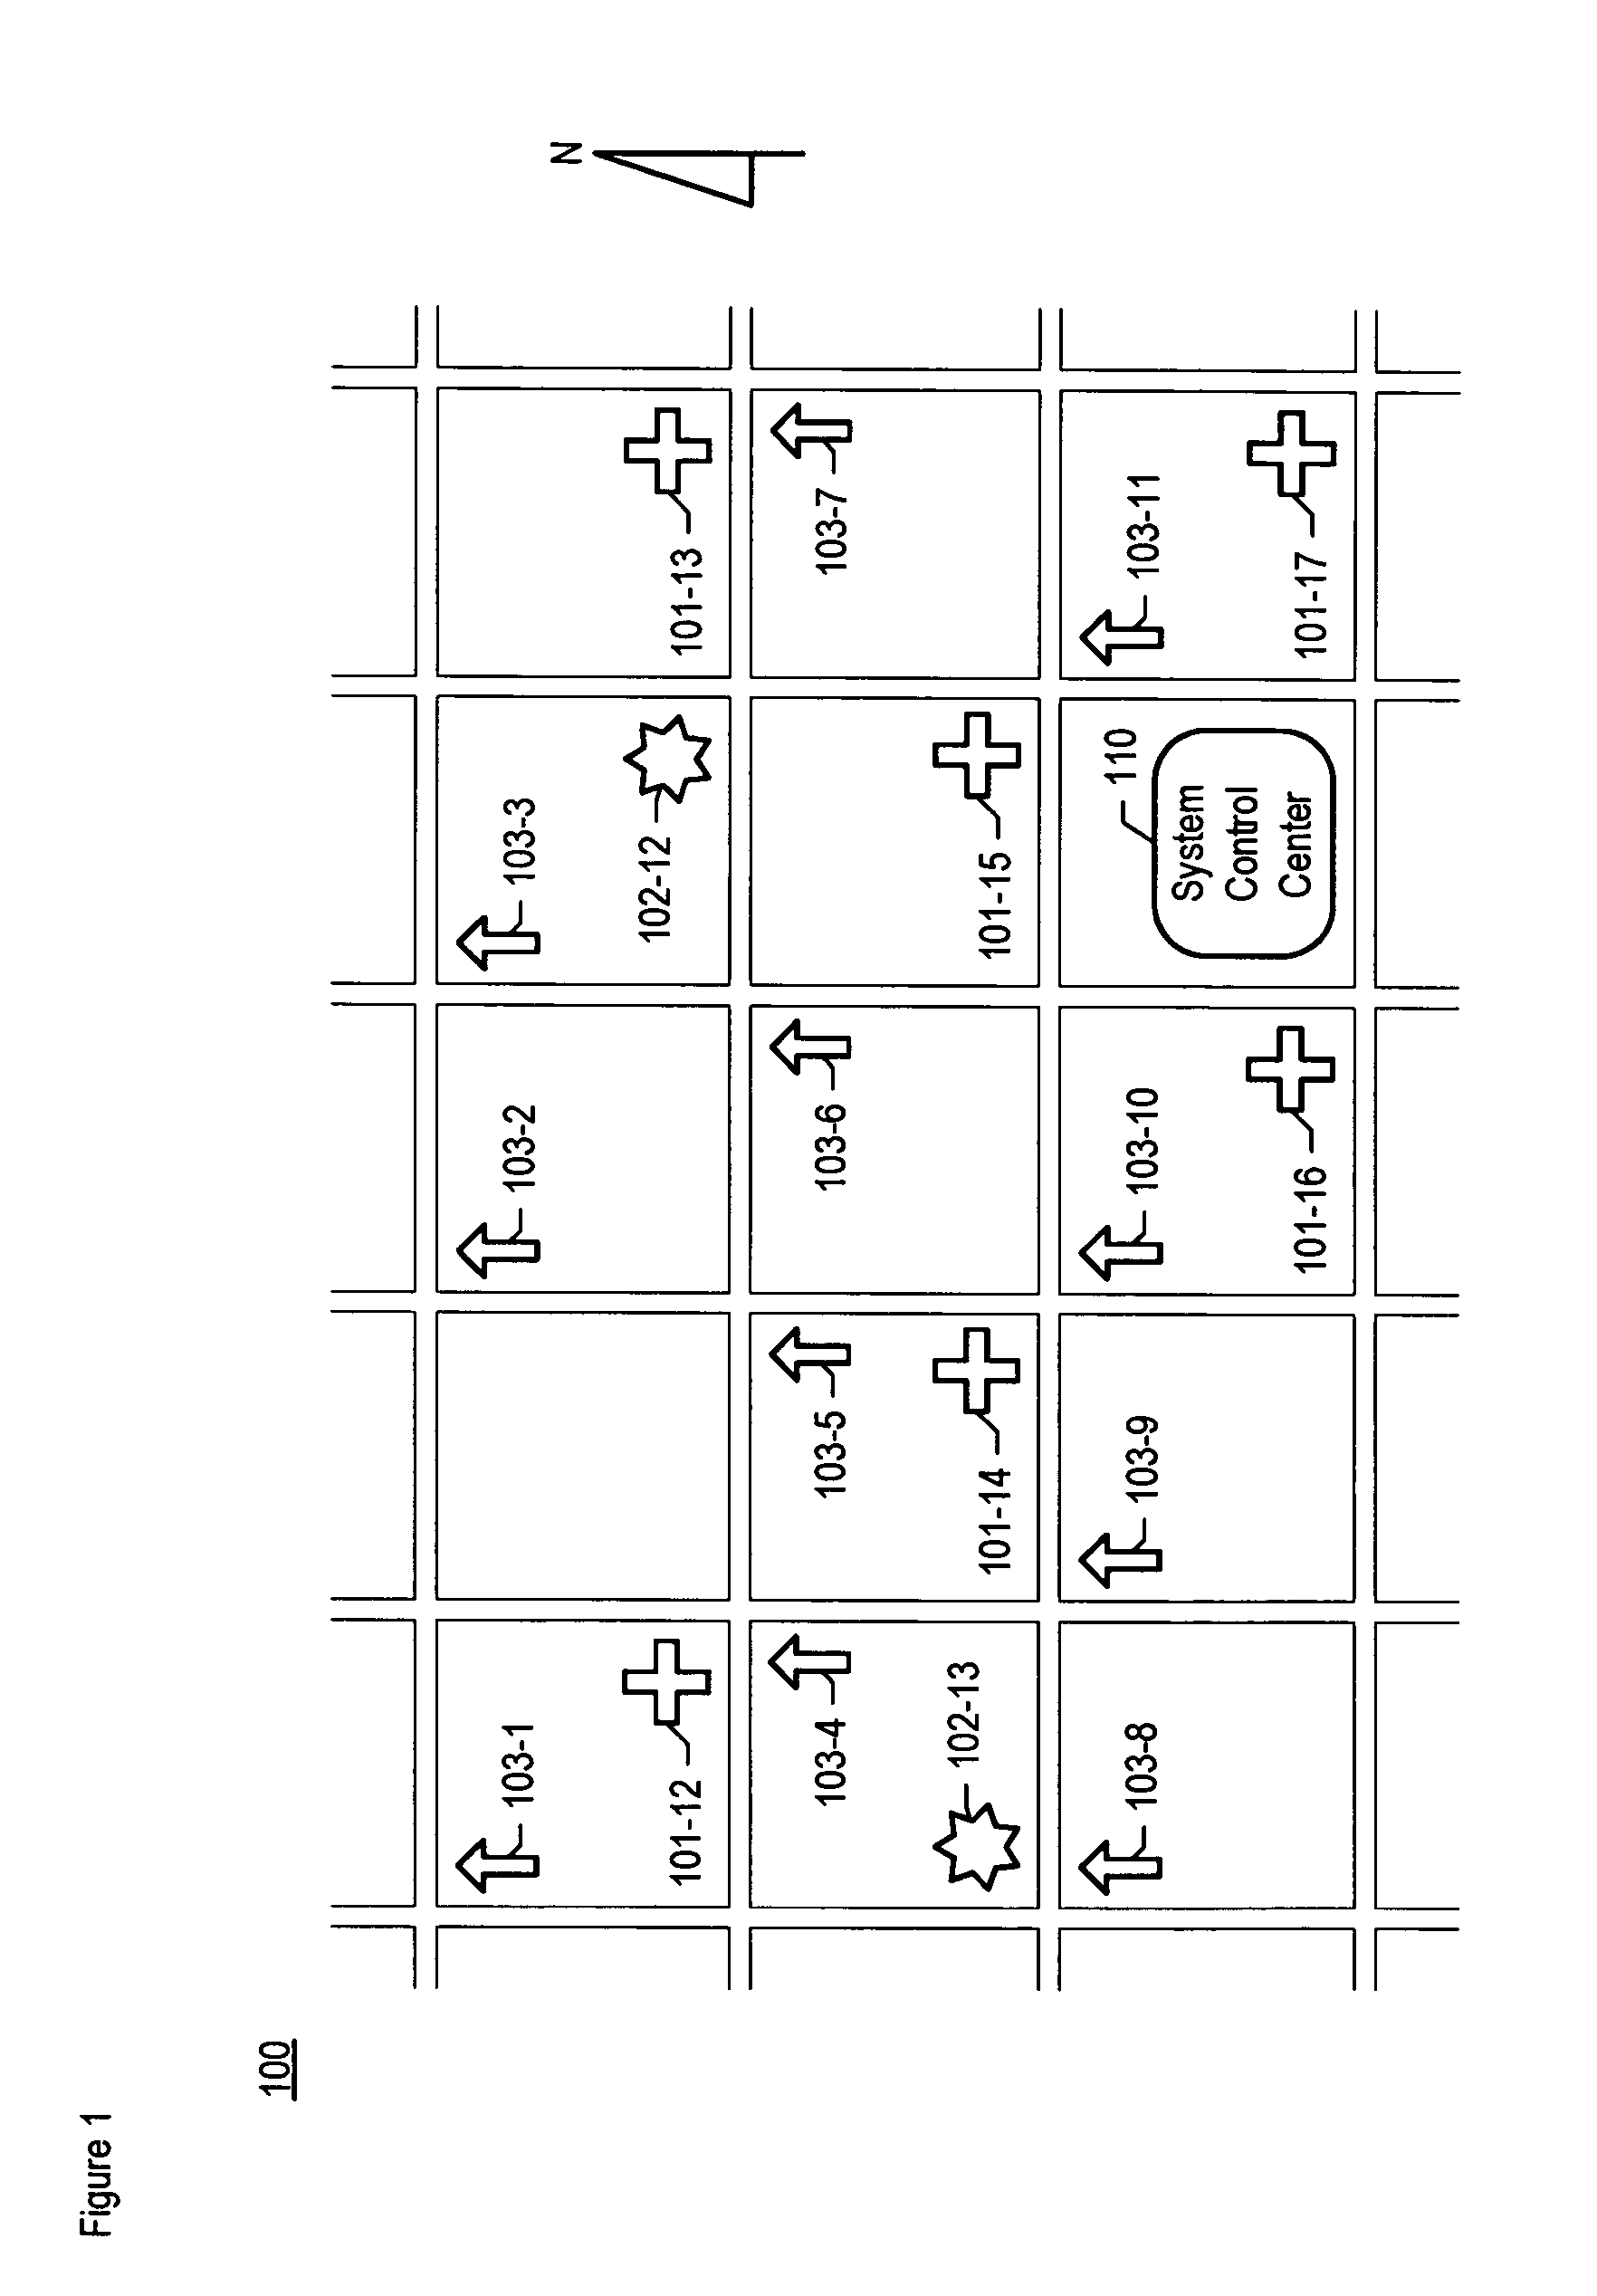 Chemical, biological, radiological, and nuclear weapon detection system comprising array of spatially-disparate sensors and surveillance equipment